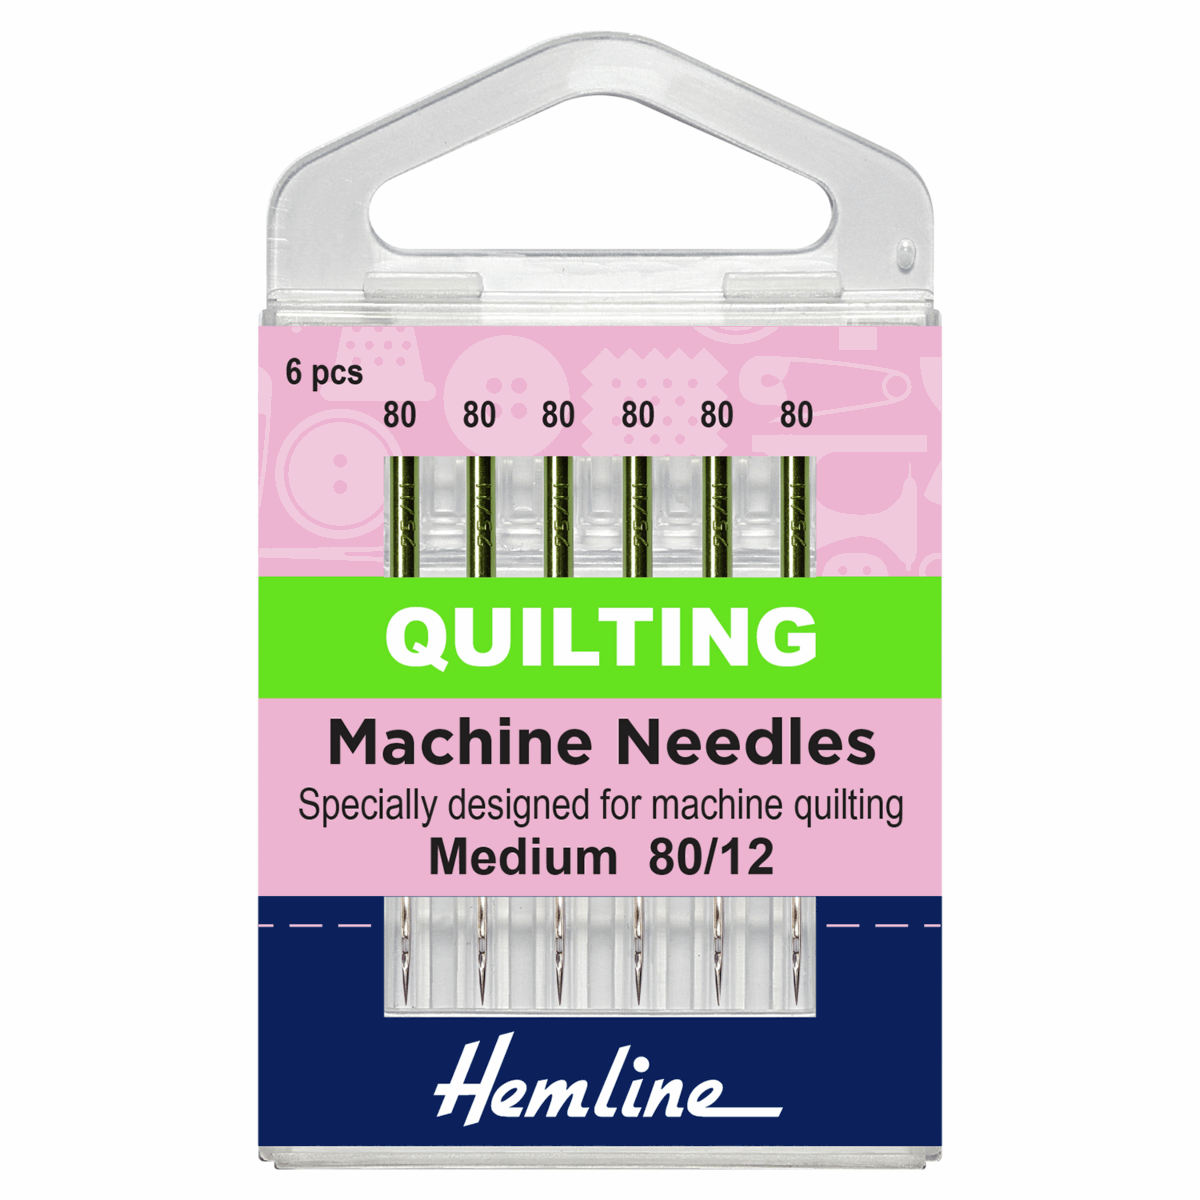 Quilting Sewing Machine Needles.